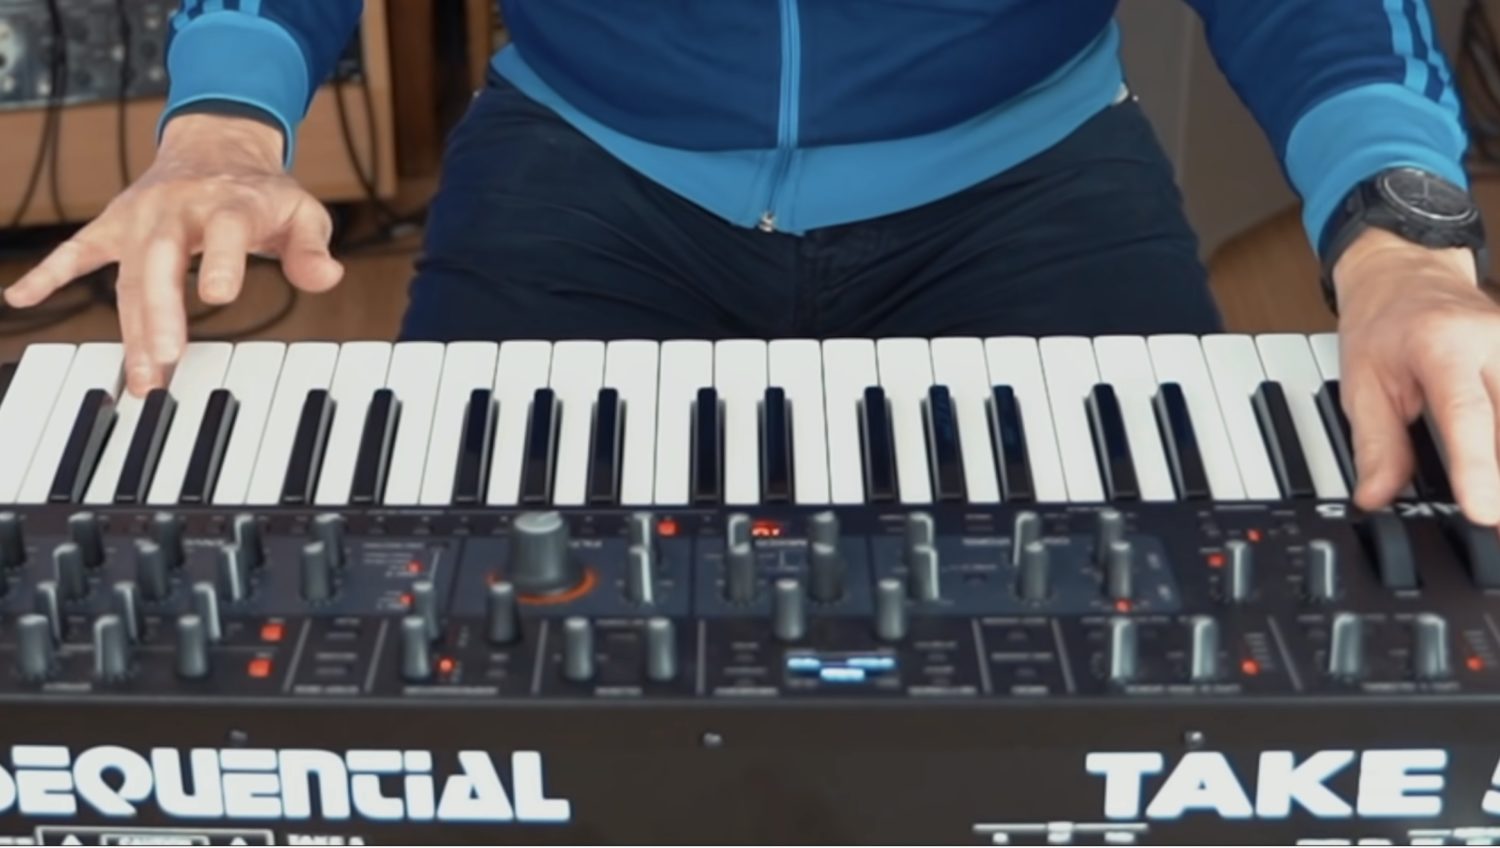 sequential take 5 synth